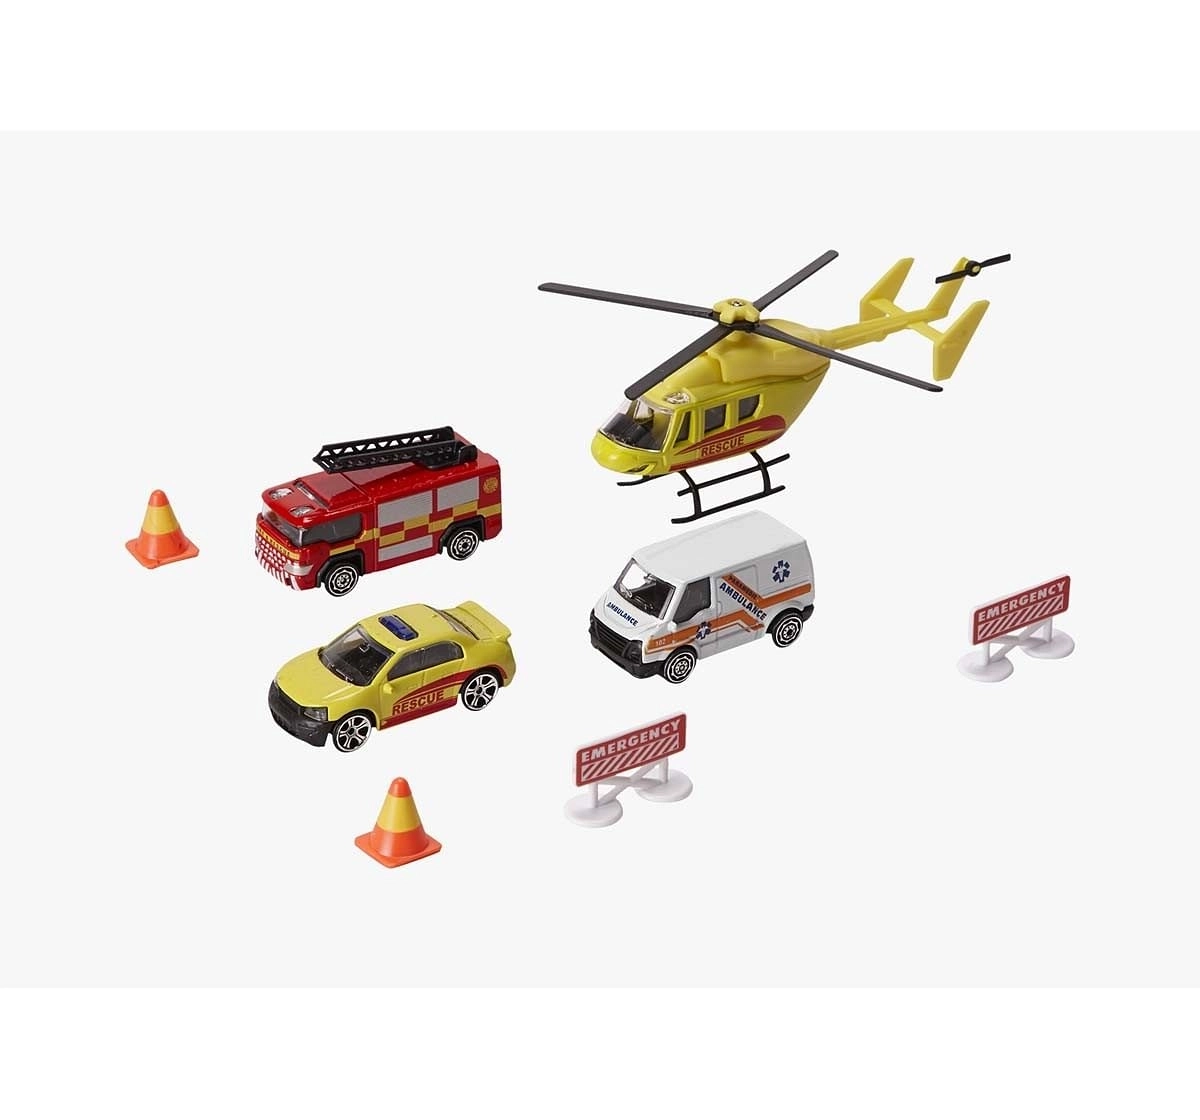 Hti Yellow Teamsterz Plastic City Rescue Toy Set Vehicles for Kids age 3Y+